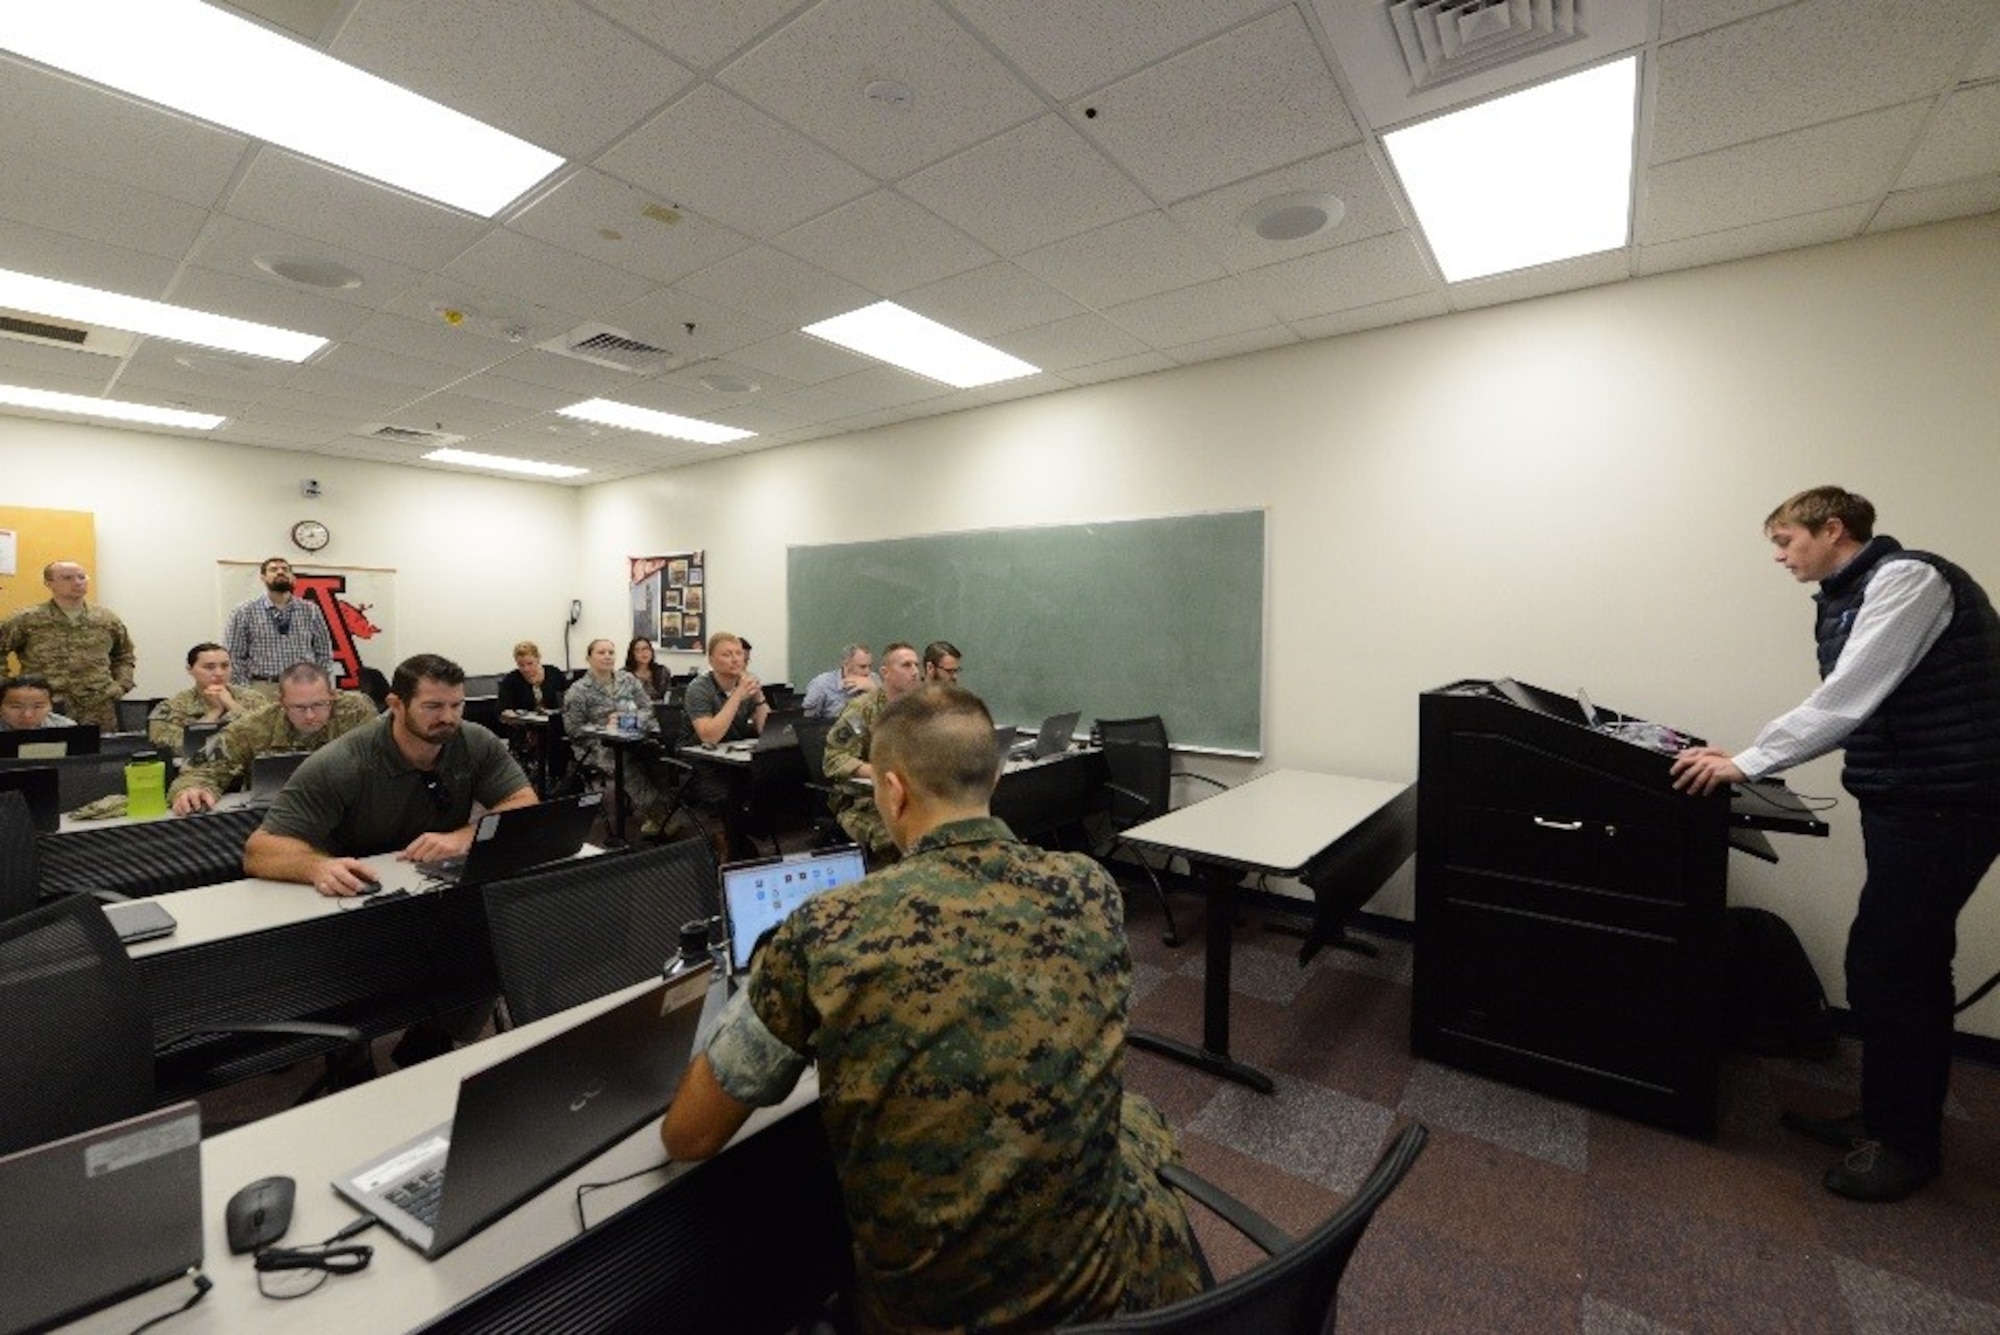 Intelligence analysts assigned to the 11th Special Operations Intelligence Squadron attend a data-tagging training event Aug. 24, 2017, at Hurlburt Field, Fla. Data-tagging technology is bringing warfighting innovation to intelligence gathering efforts. (U.S. Air Force photo by Senior Airman Lynette M. Rolen)